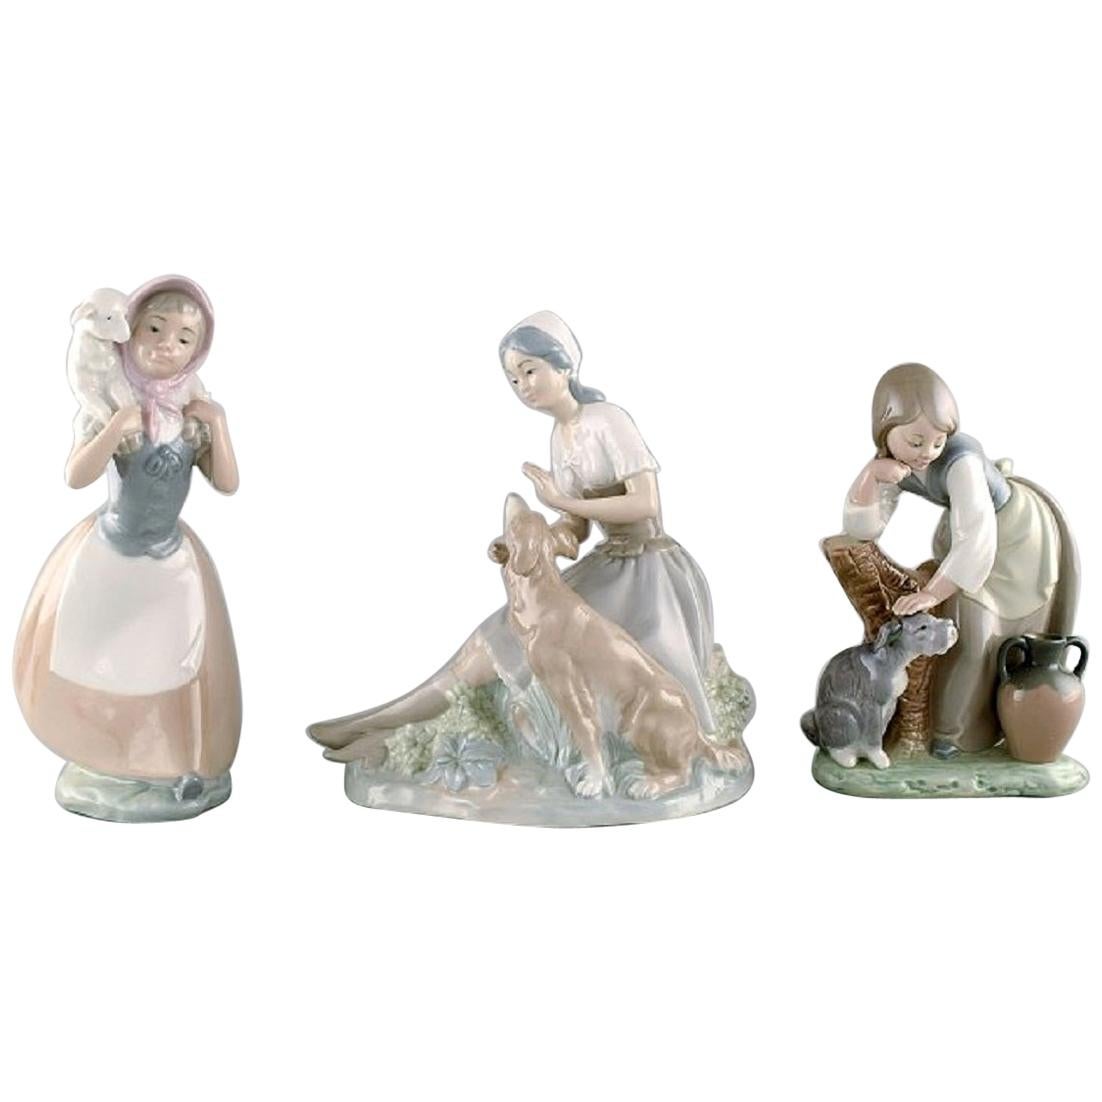 Lladro and Nao, Spain, Three Porcelain Figurines, Young Girls with Farm Animals